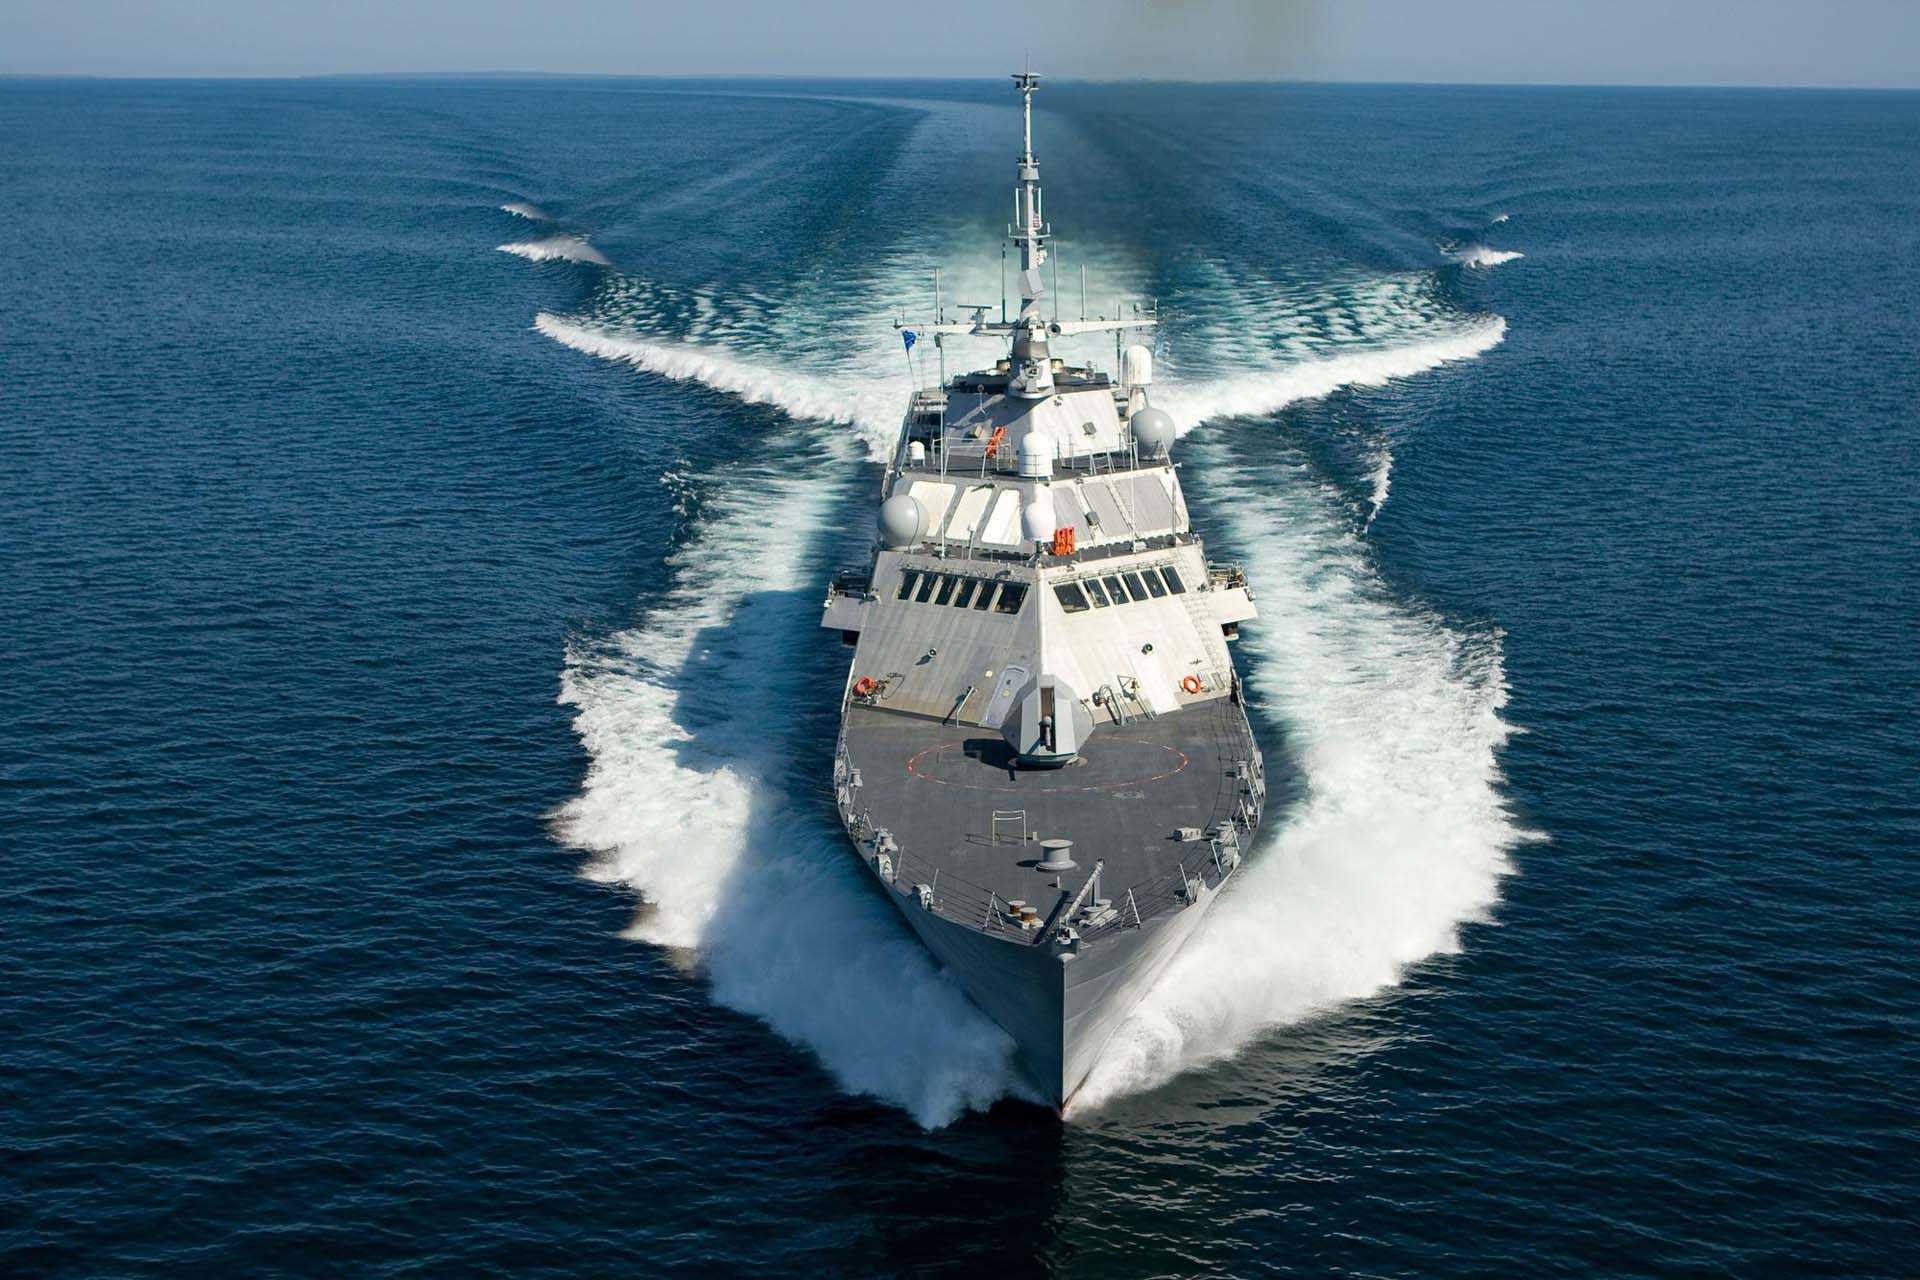 Nation celebrates Indian Navy Day to recognise the achievements and role of the naval force to the country.